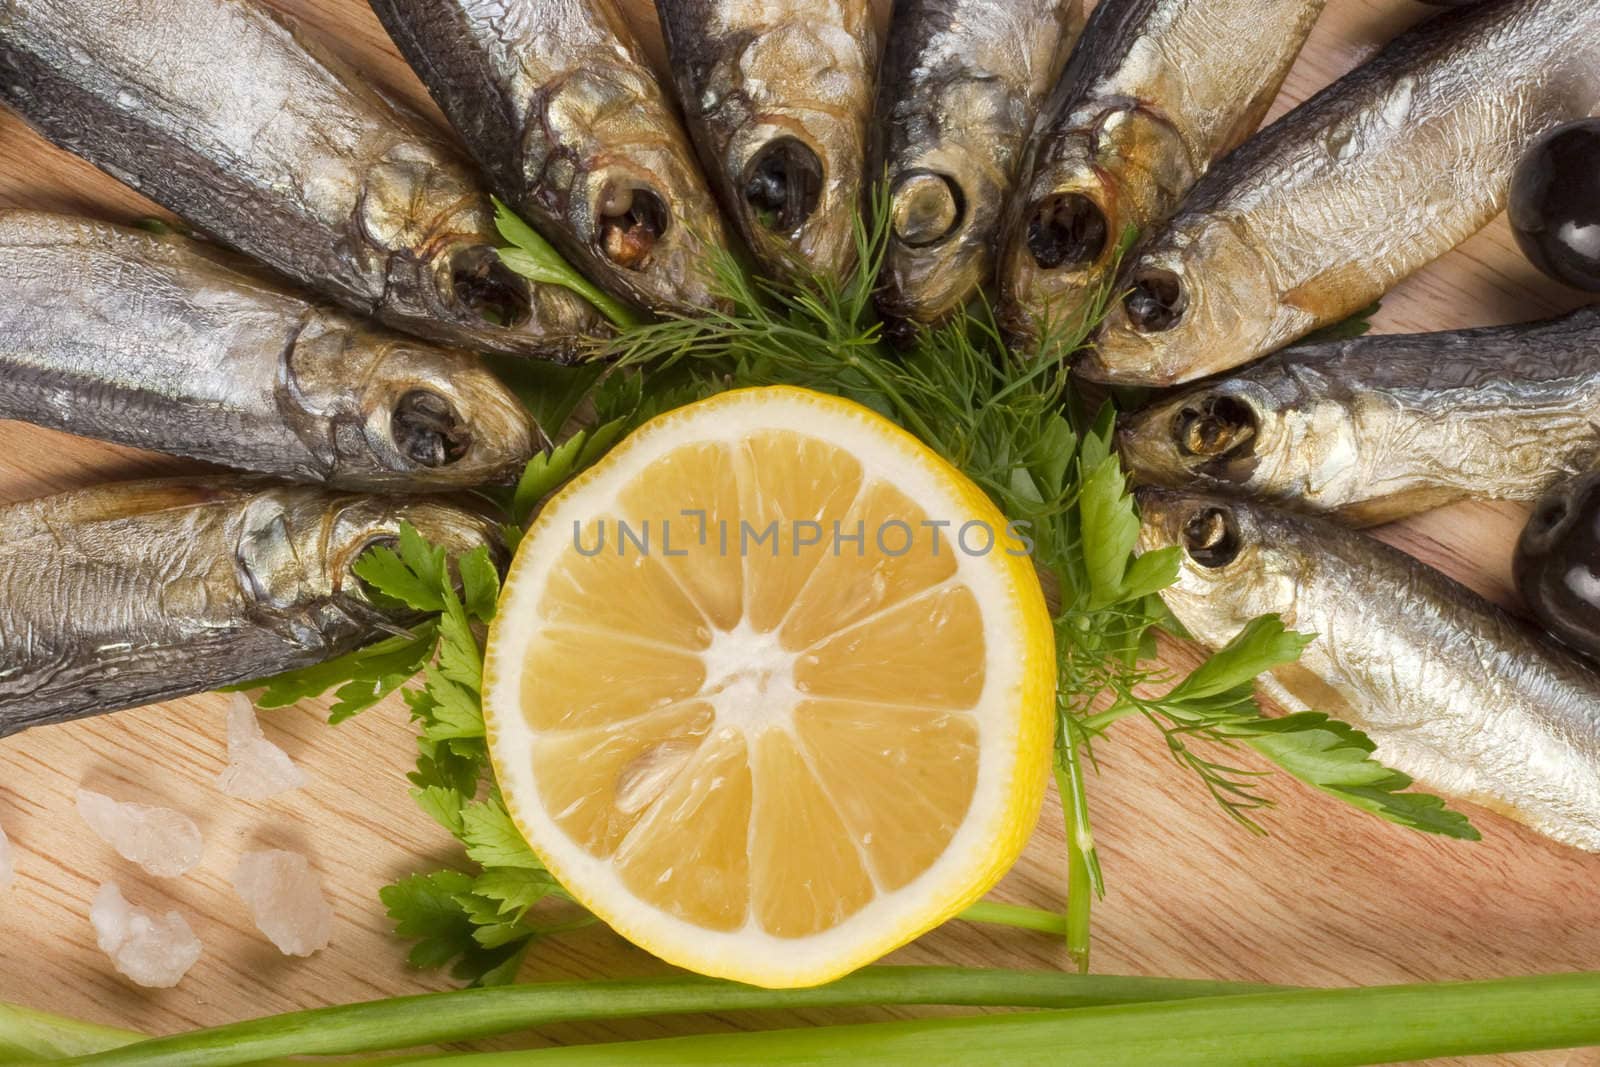 A composition with clupea herring by igor_stramyk